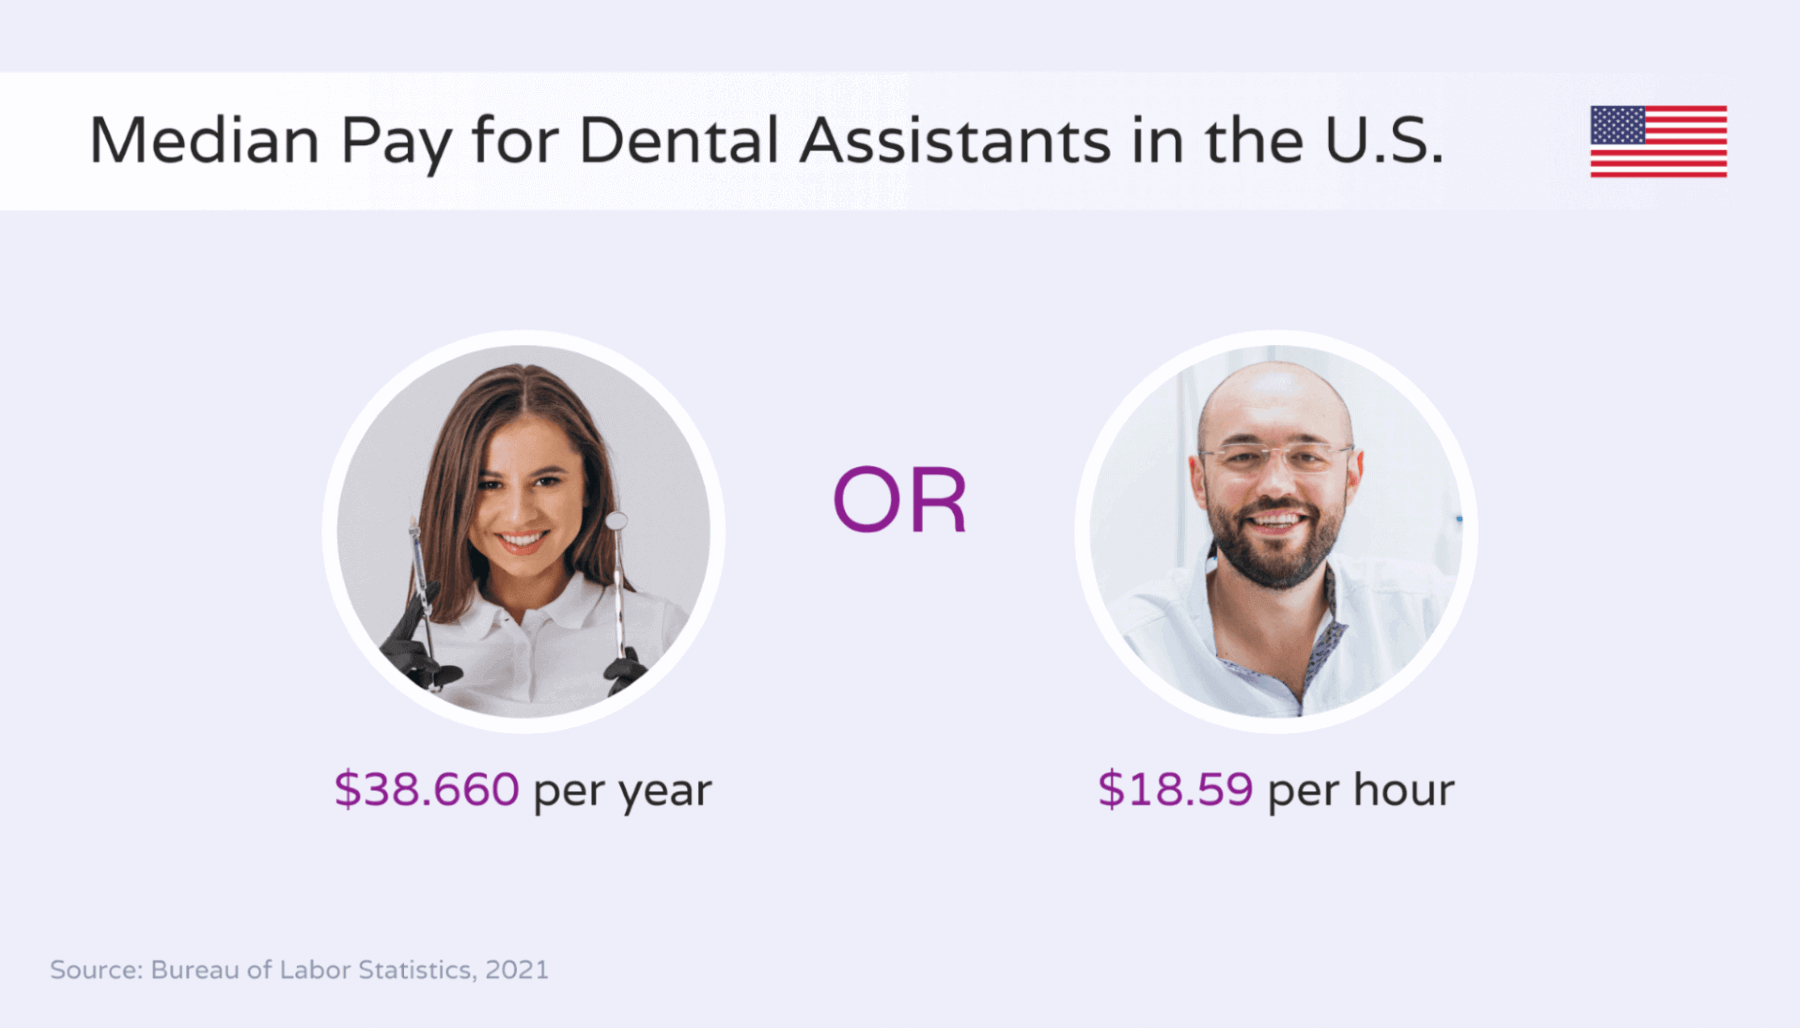 illustration showing the median salary and hourly rate of dental assistants in the US